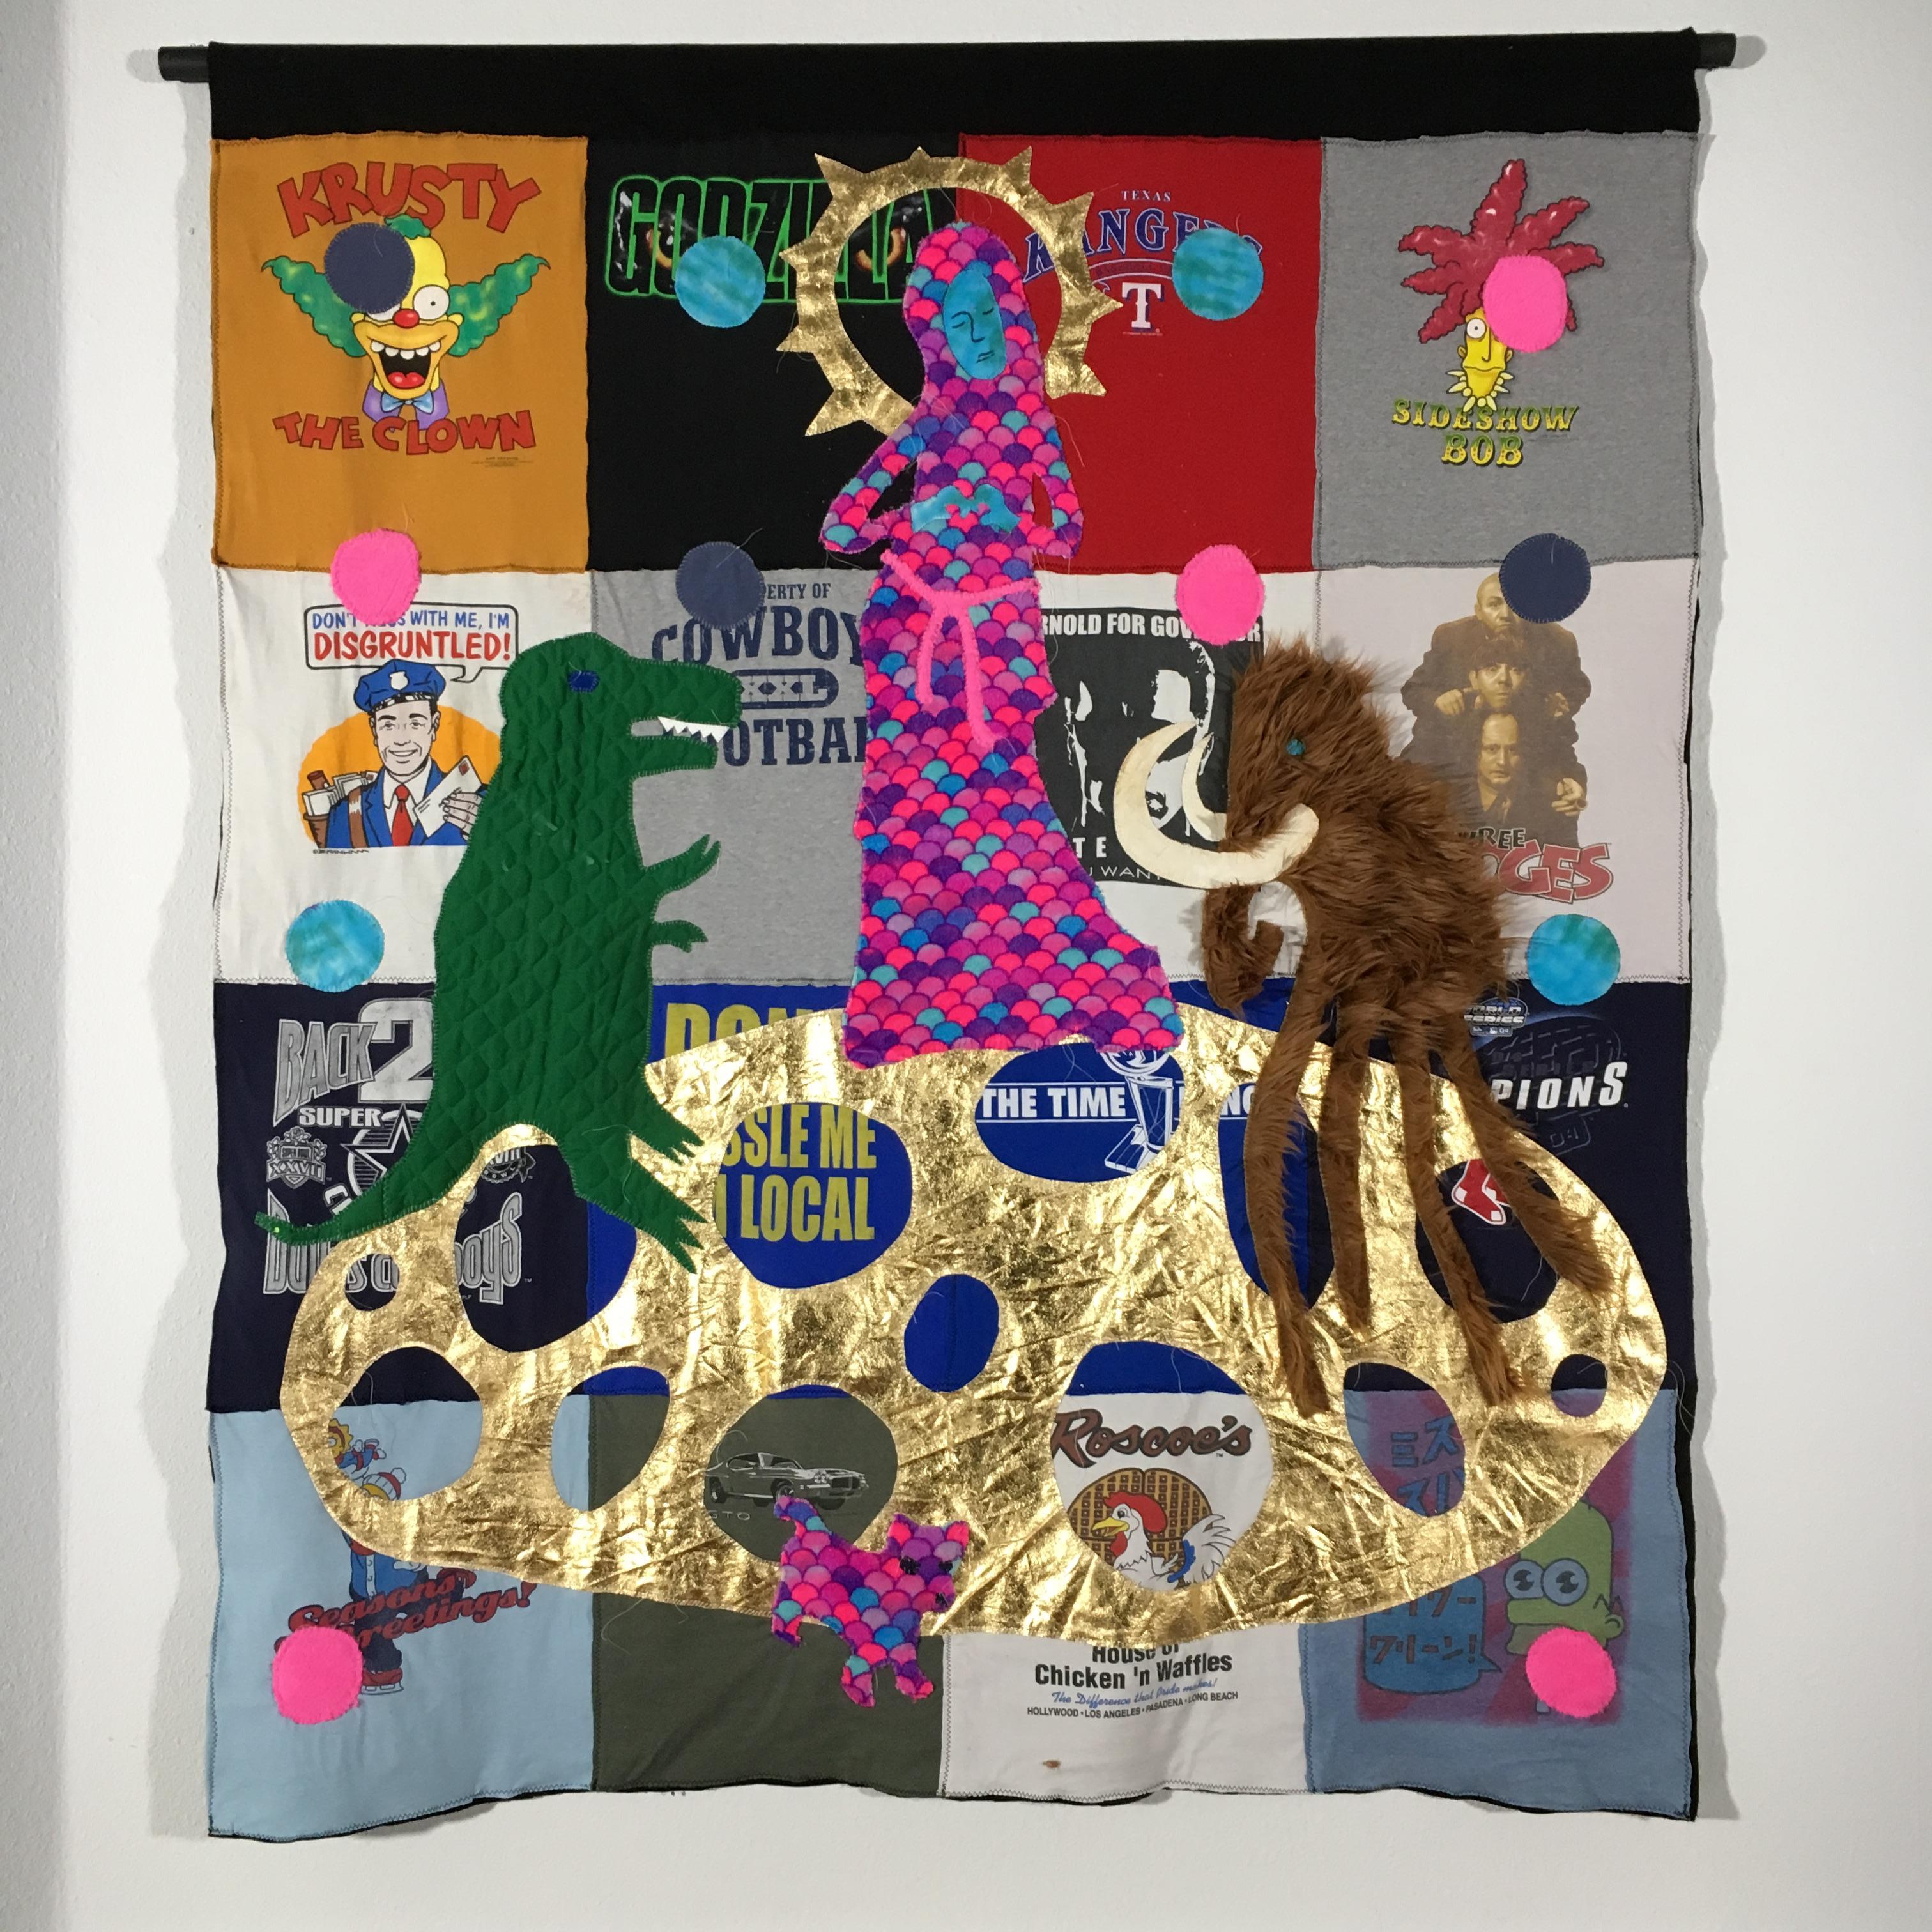 Tee Shirt, Tapestry: 'The Marriage of the Long Legged Mammoth' - Mixed Media Art by Joshua Goode